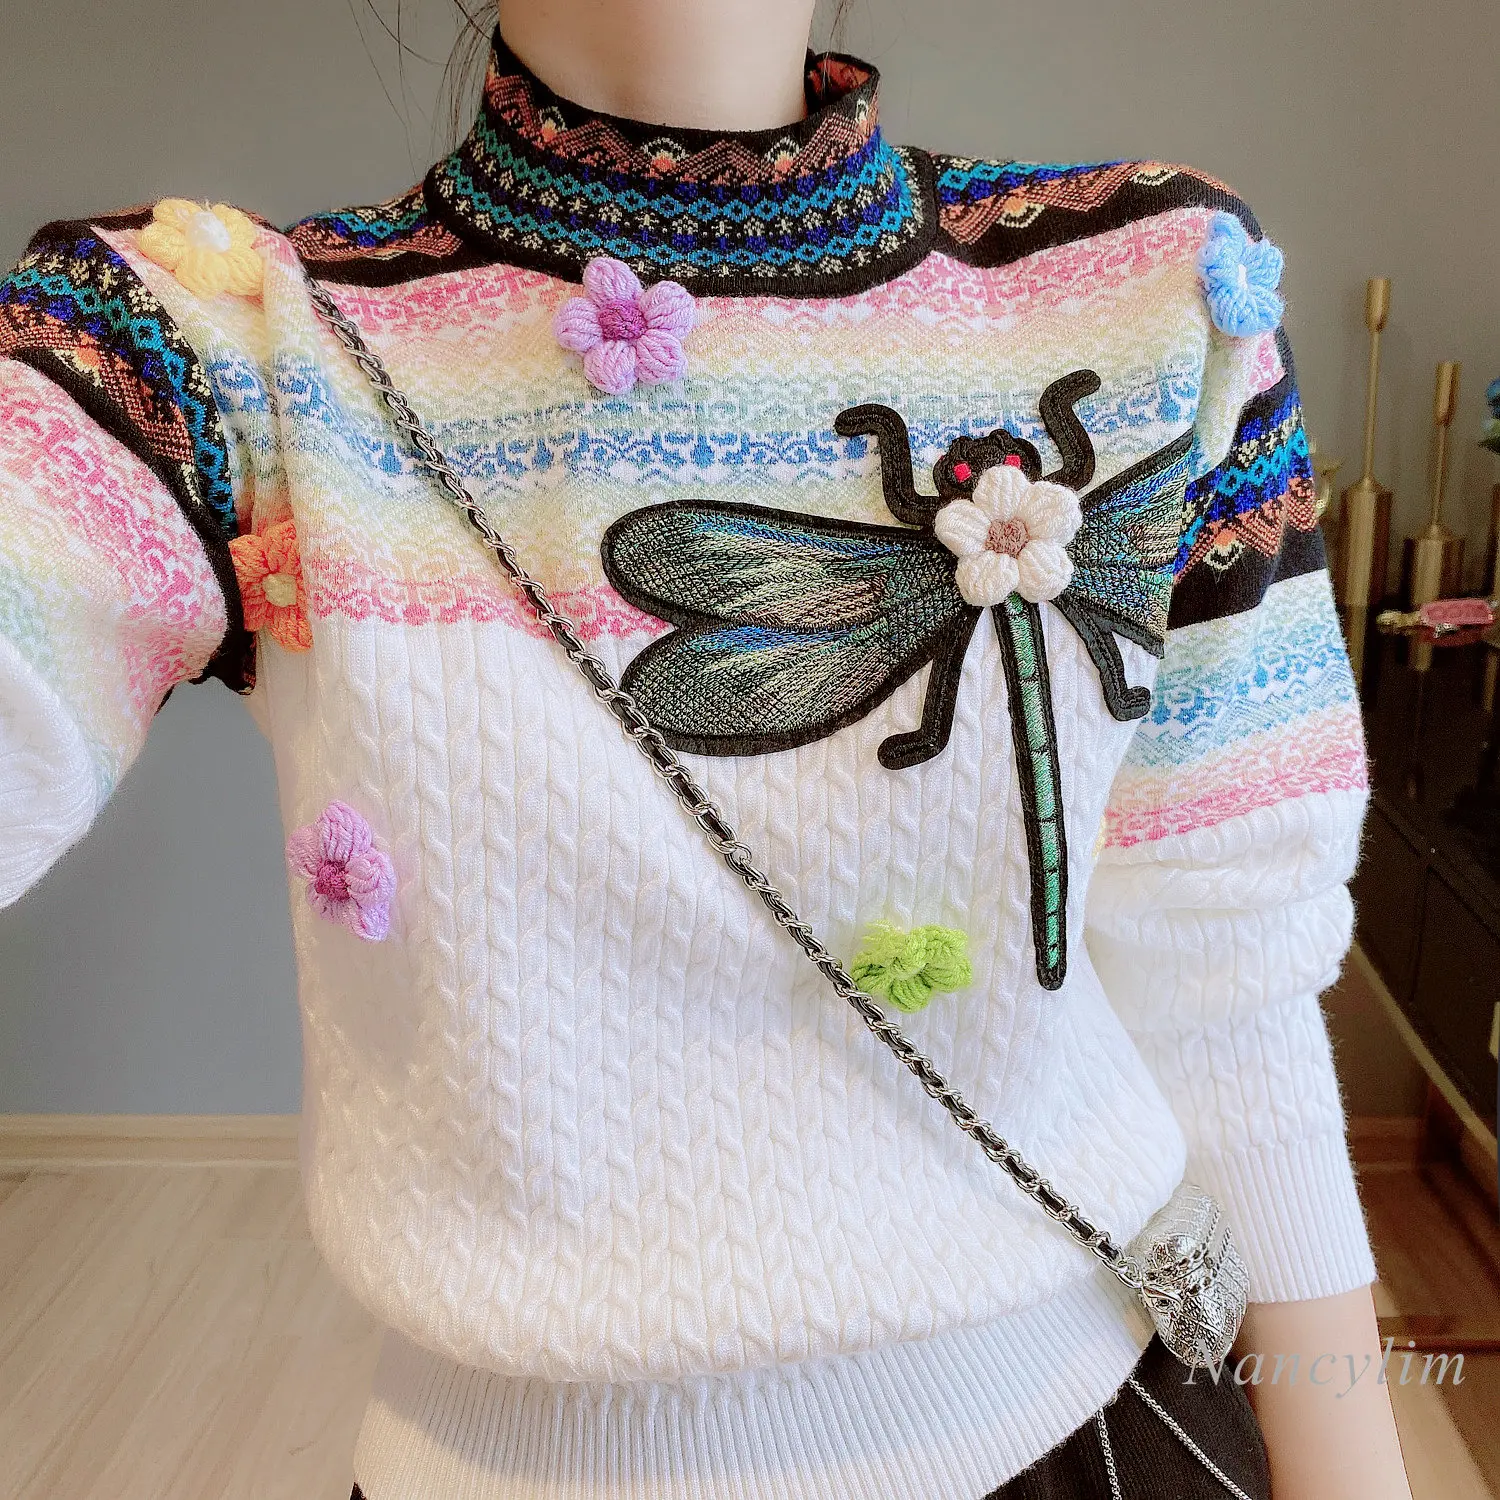 

Women Spring Fall Contrast Color Twist Crocheted Sweater 3D Flowers Dragoy Embroidered Pullovers Hooked Knitwear Crop Tops